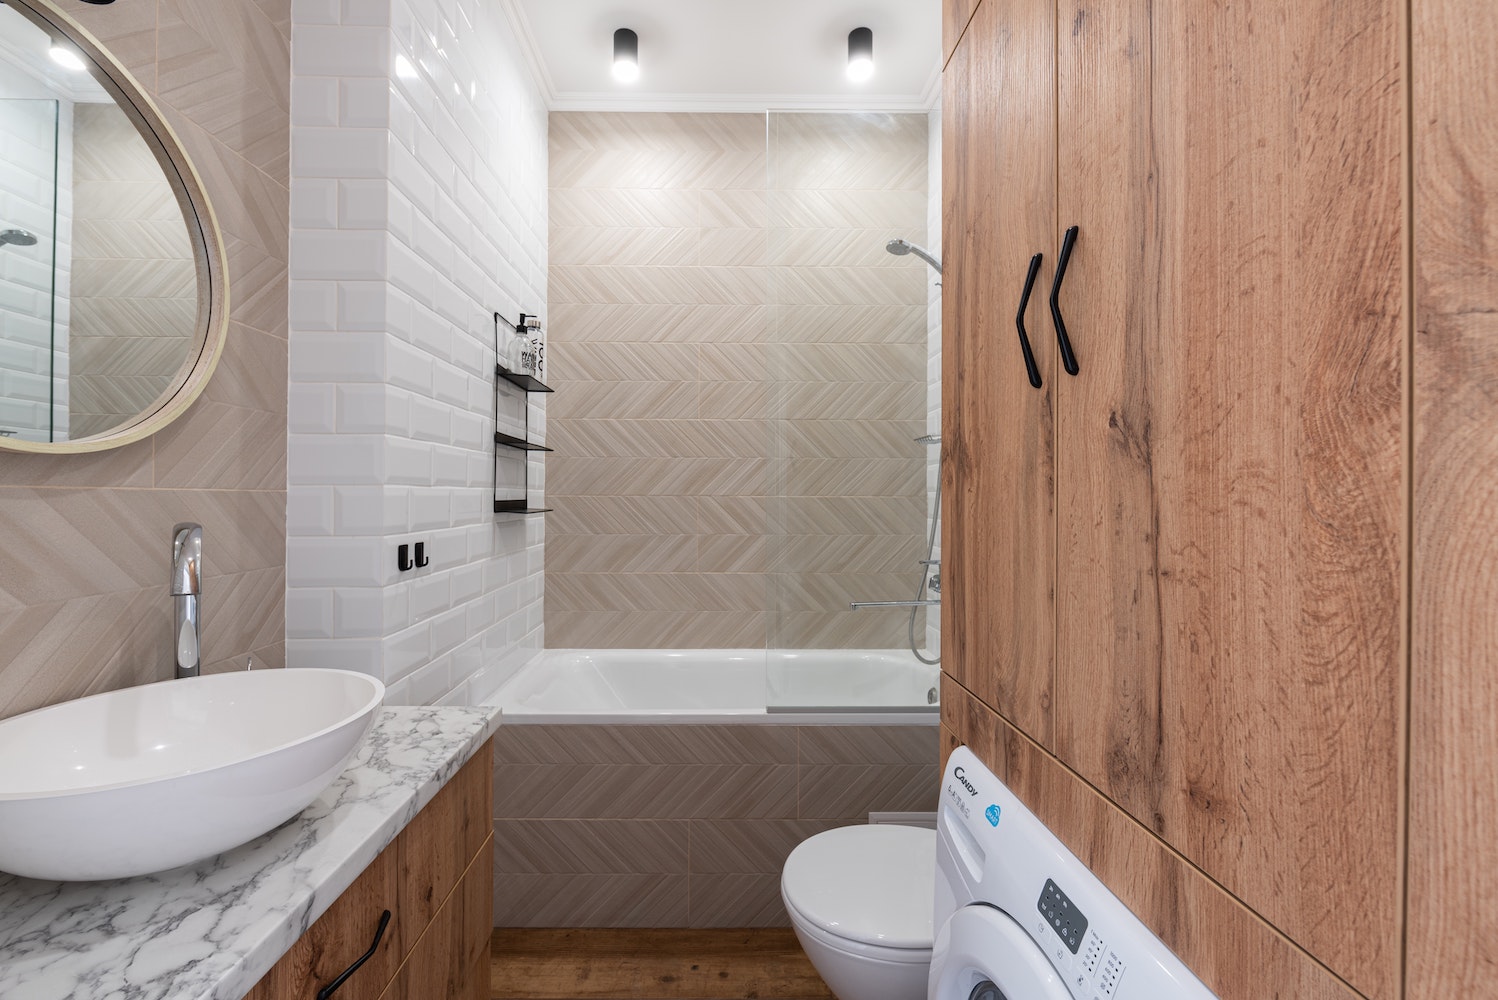 Bathroom with wood cabinets, washer, marble countertop and white subway tile